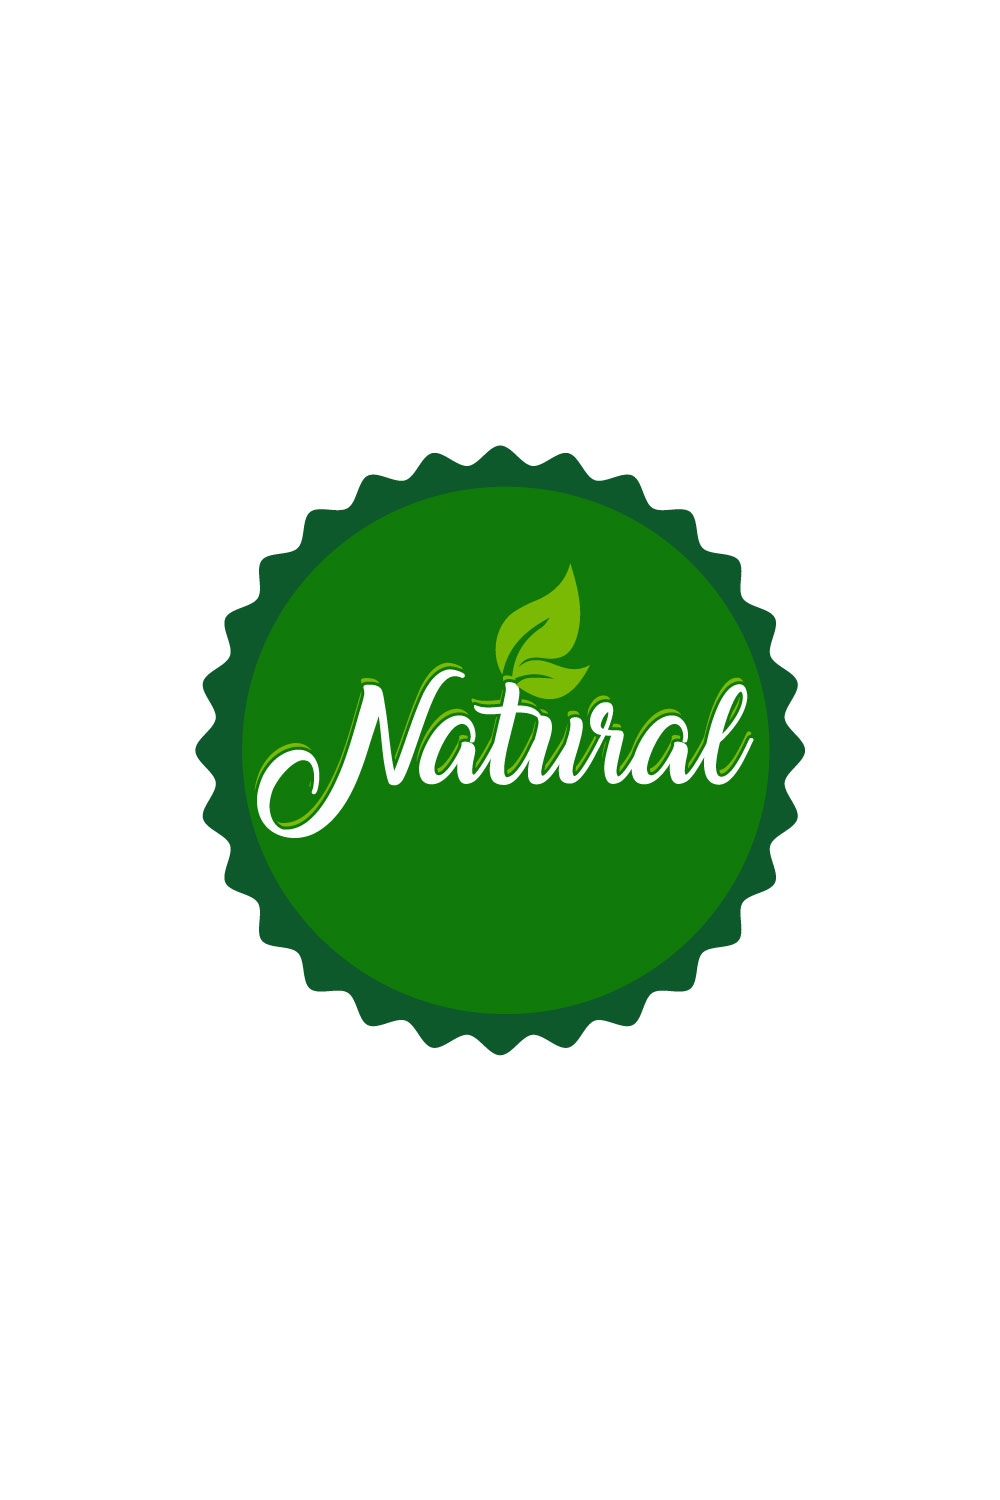 Free eco food logo pinterest preview image.